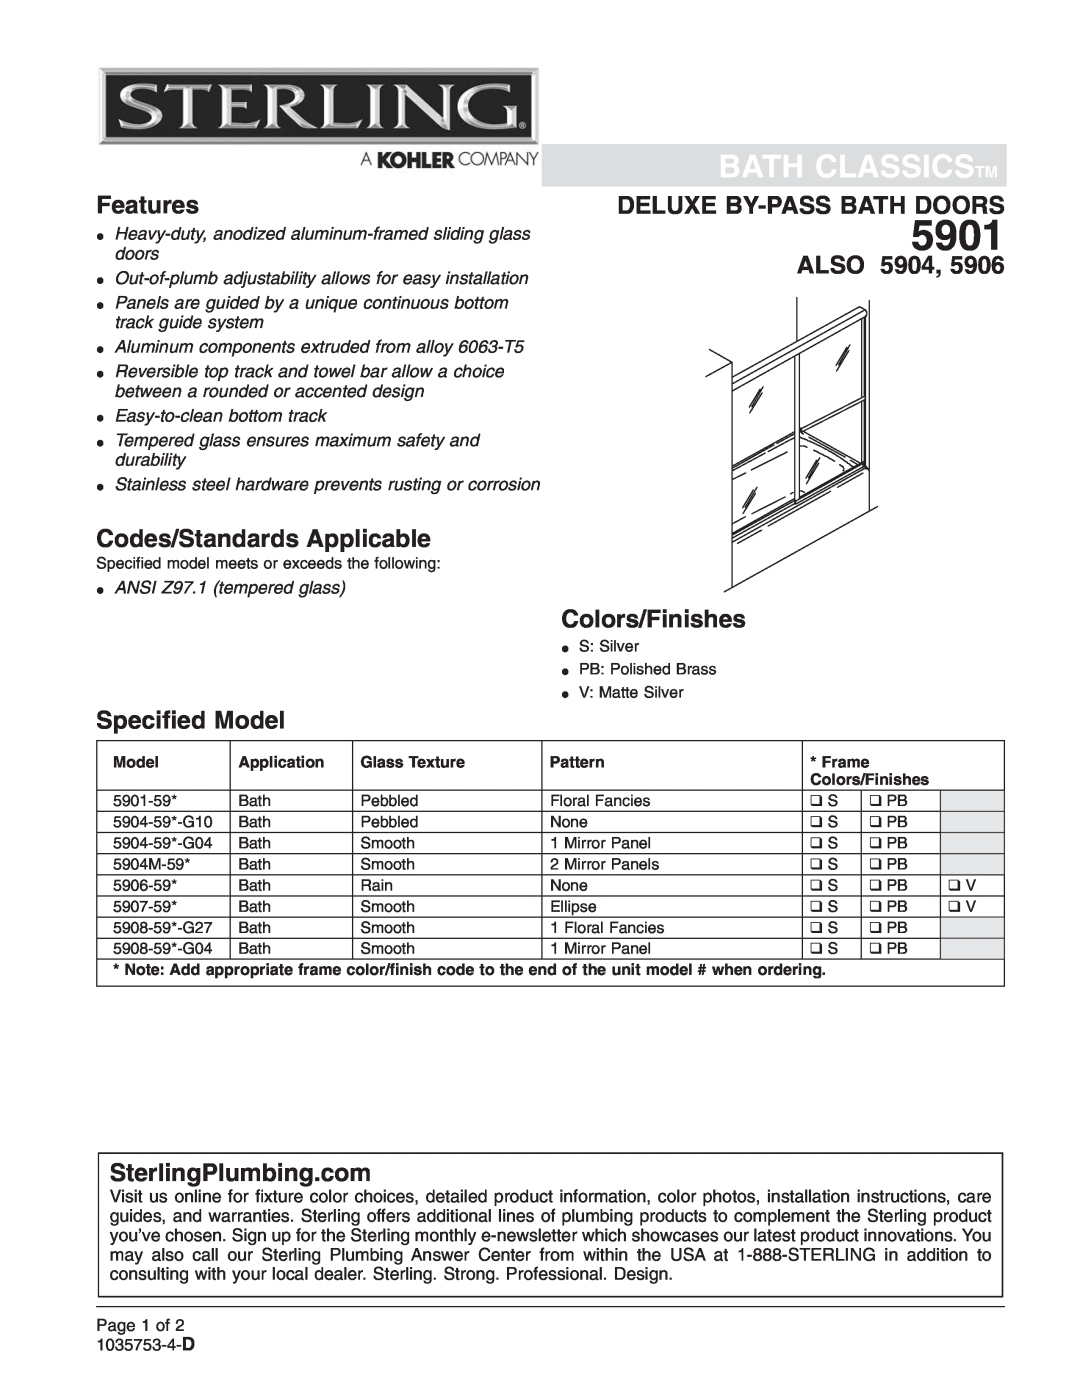 Sterling Plumbing 5907-59* installation instructions Bath Classicstm, Features, Codes/Standards Applicable, Also, 5901 